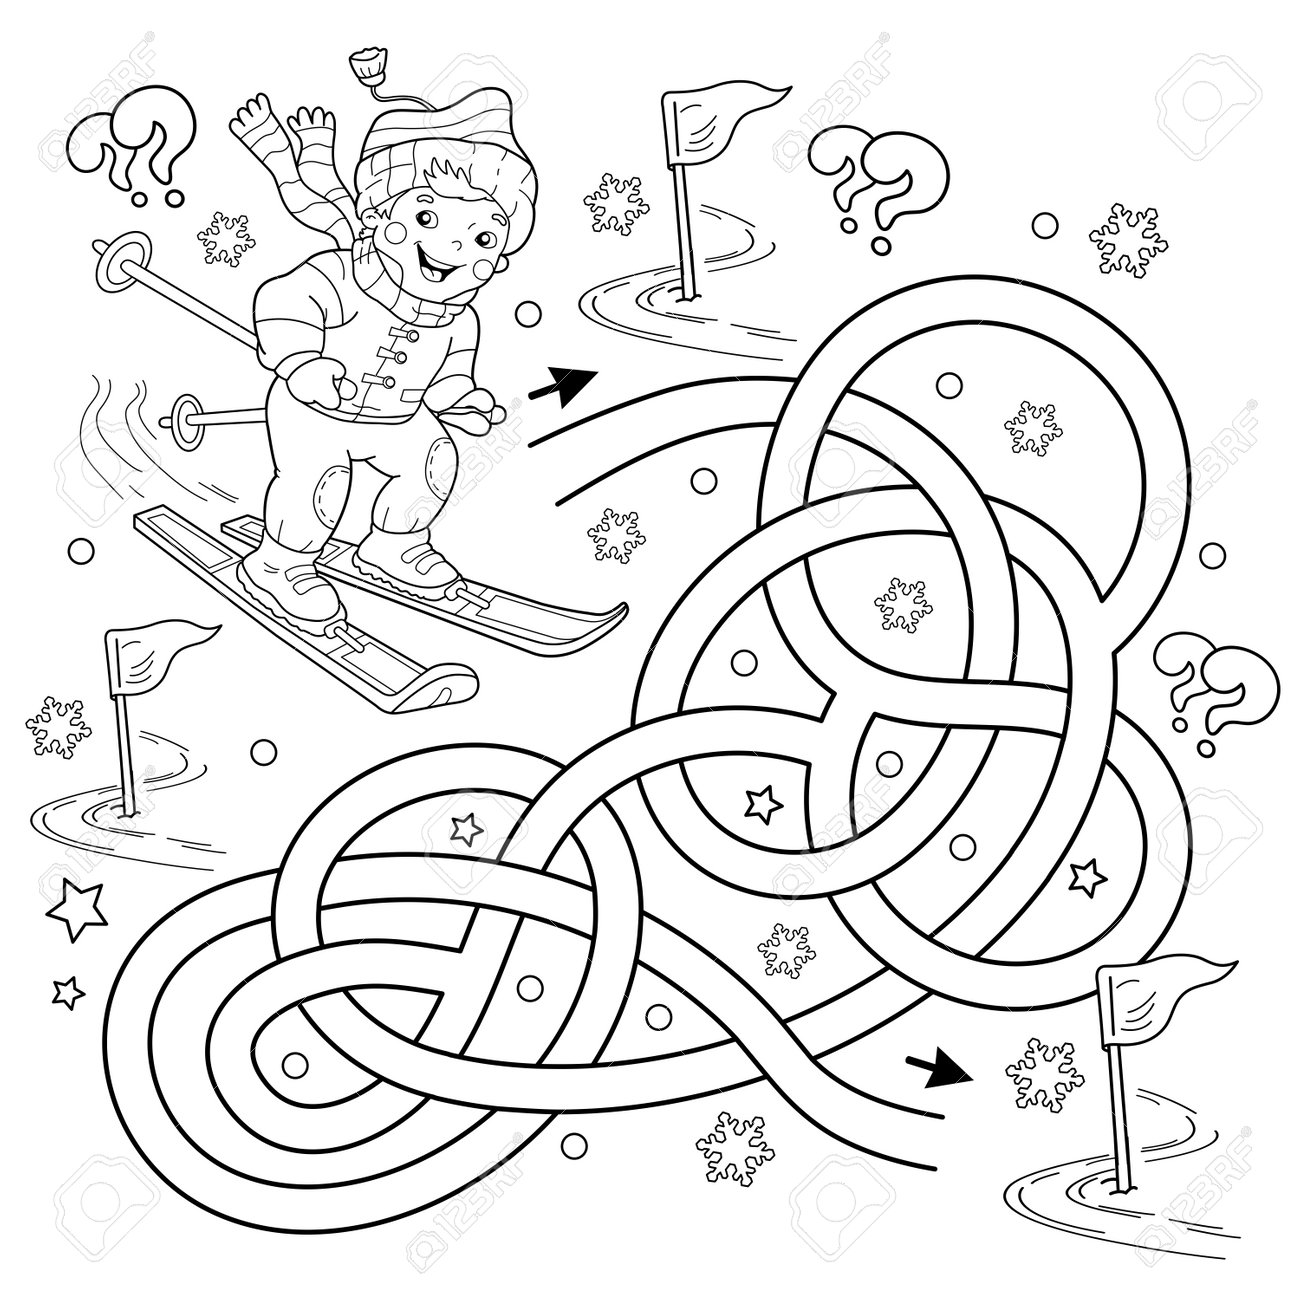 Maze or labyrinth game puzzle tangled road coloring page outline of cartoon boy skiing winter sports coloring book for kids royalty free svg cliparts vectors and stock illustration image